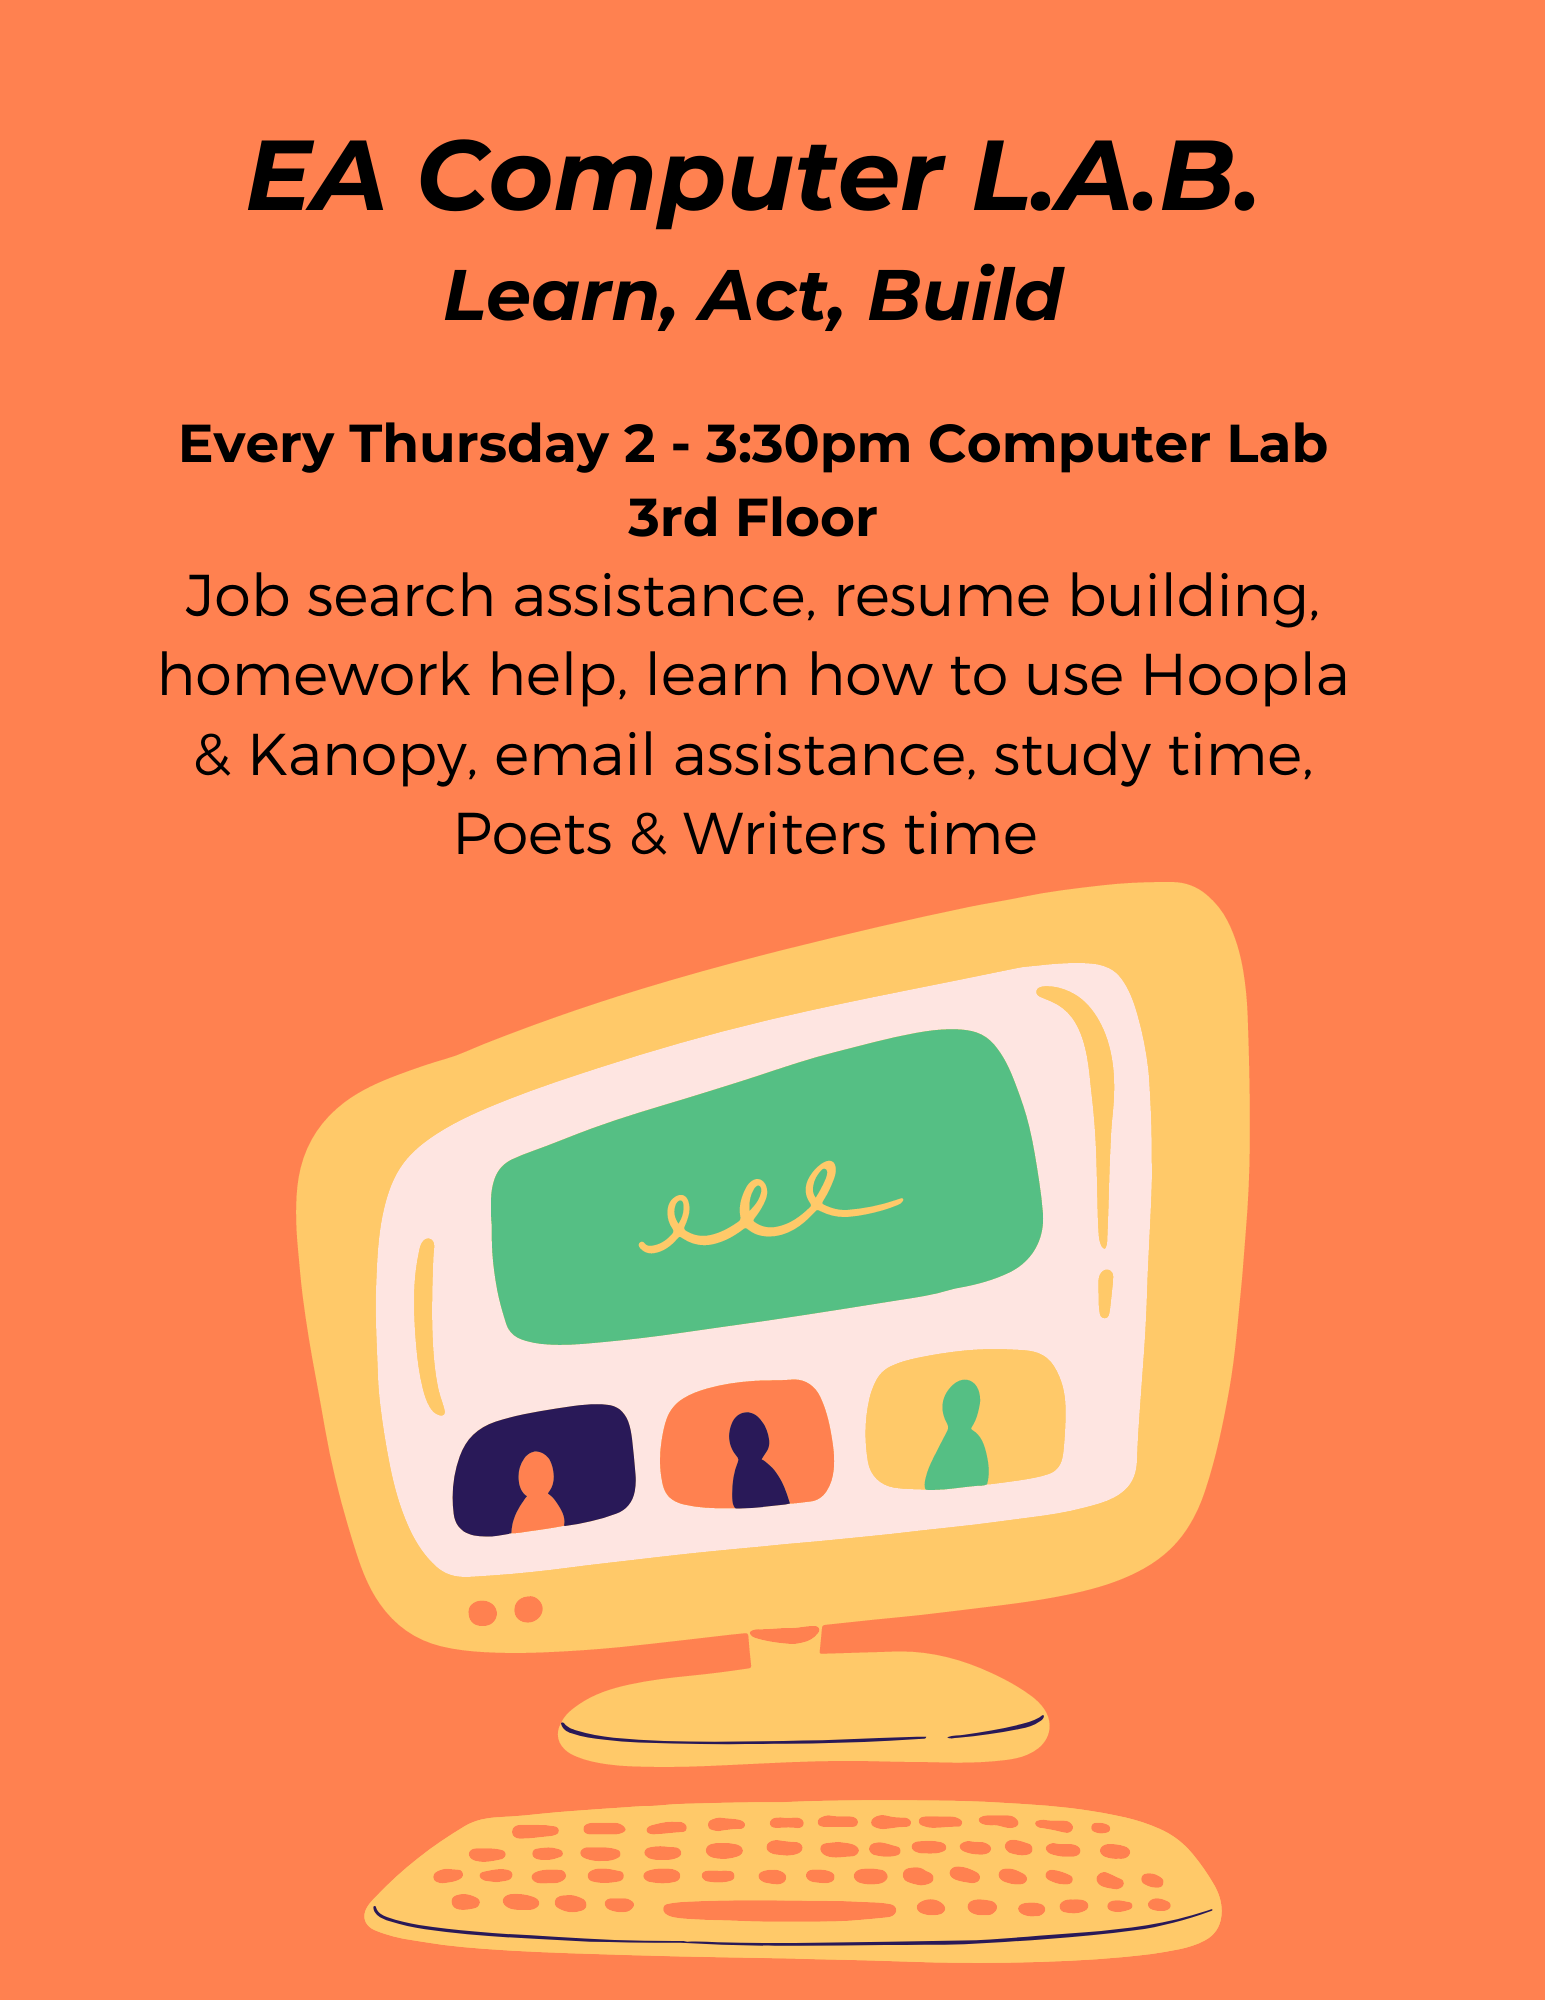 EMERGE study time, homework help, job search assistance, resume help, learn about library digital resources, and have fun! 